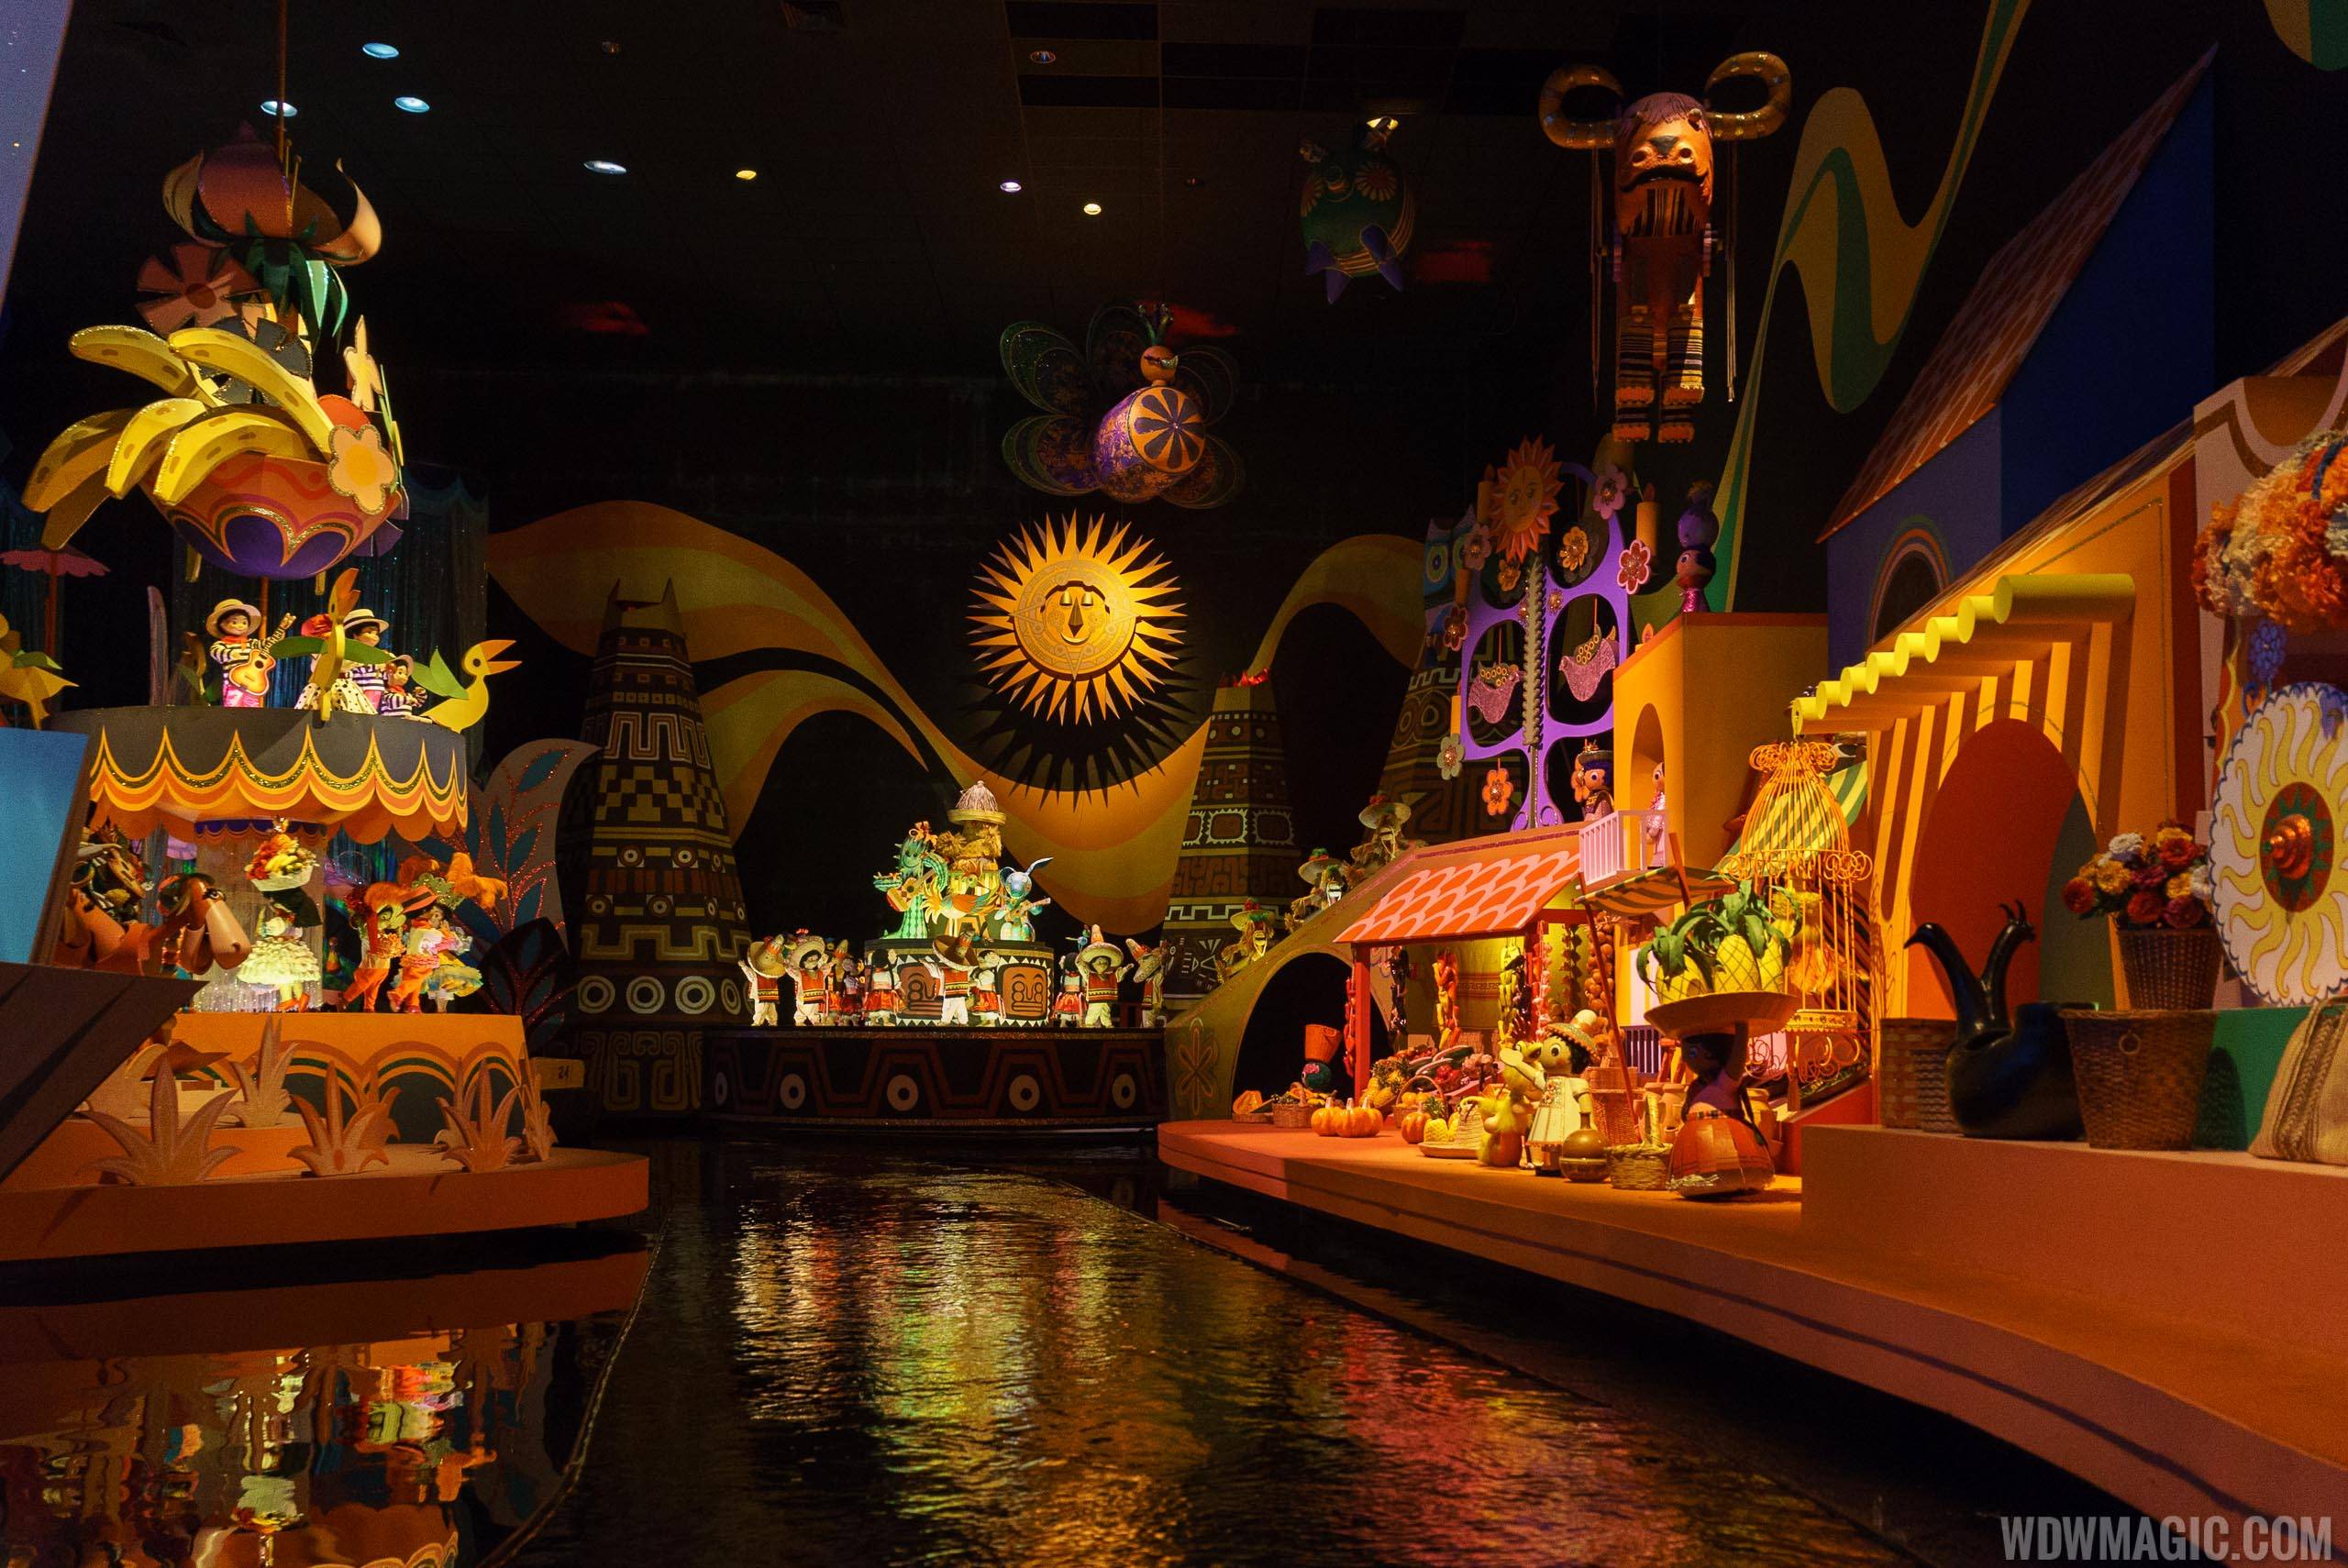 Disney to celebrate the 50th anniversary of 'it's a small world' with global sing-along and anniversary website